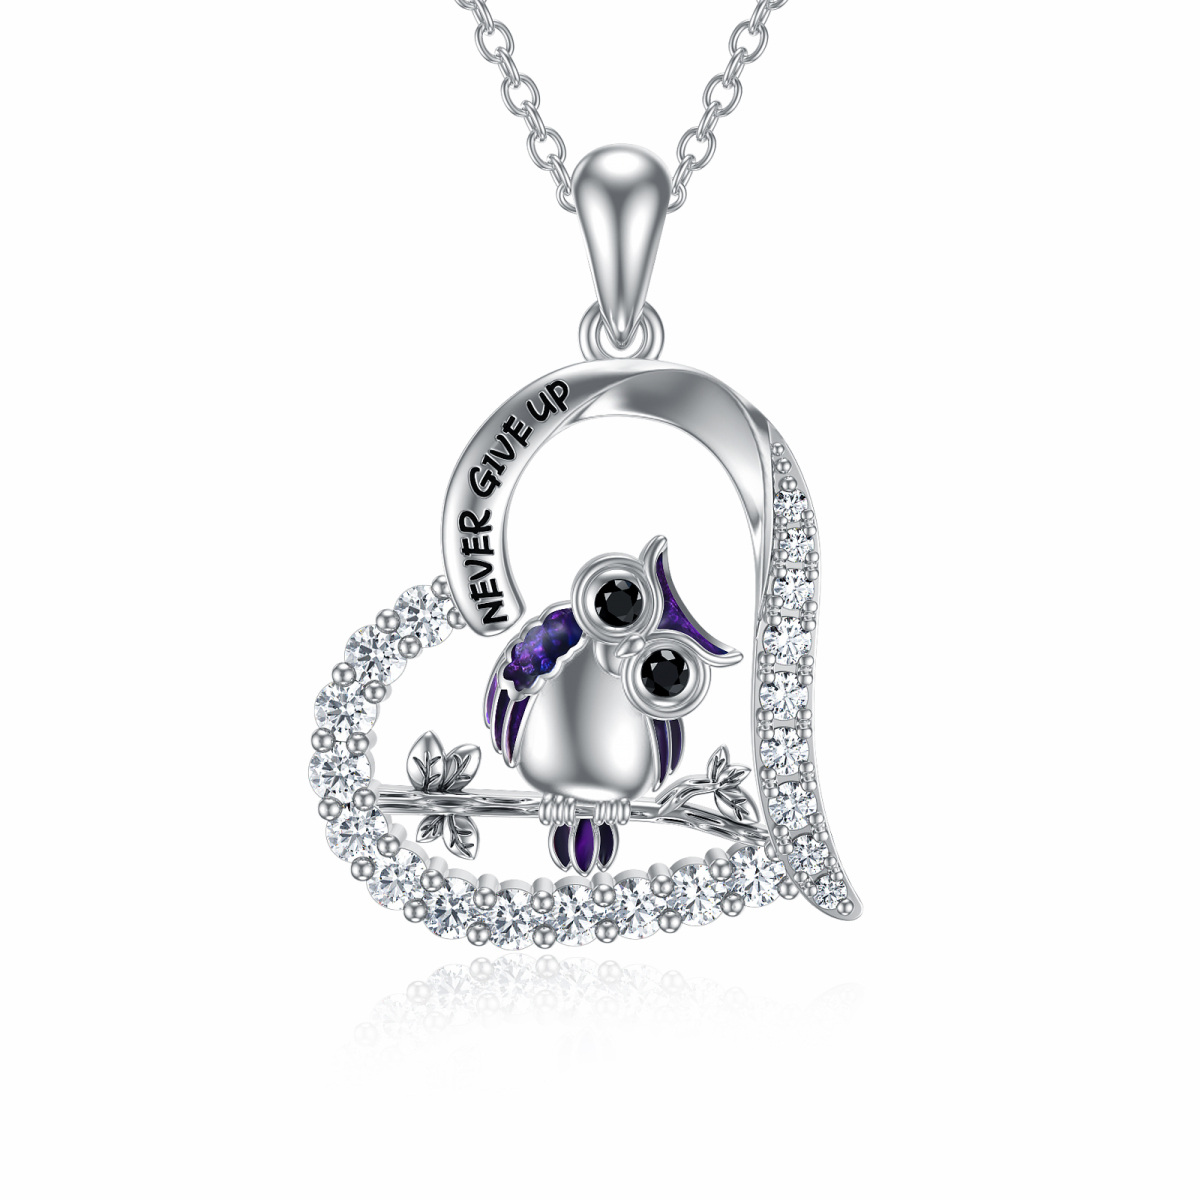 Sterling Silver Cubic Zirconia Owl & Heart Pendant Necklace with Engraved Word-1